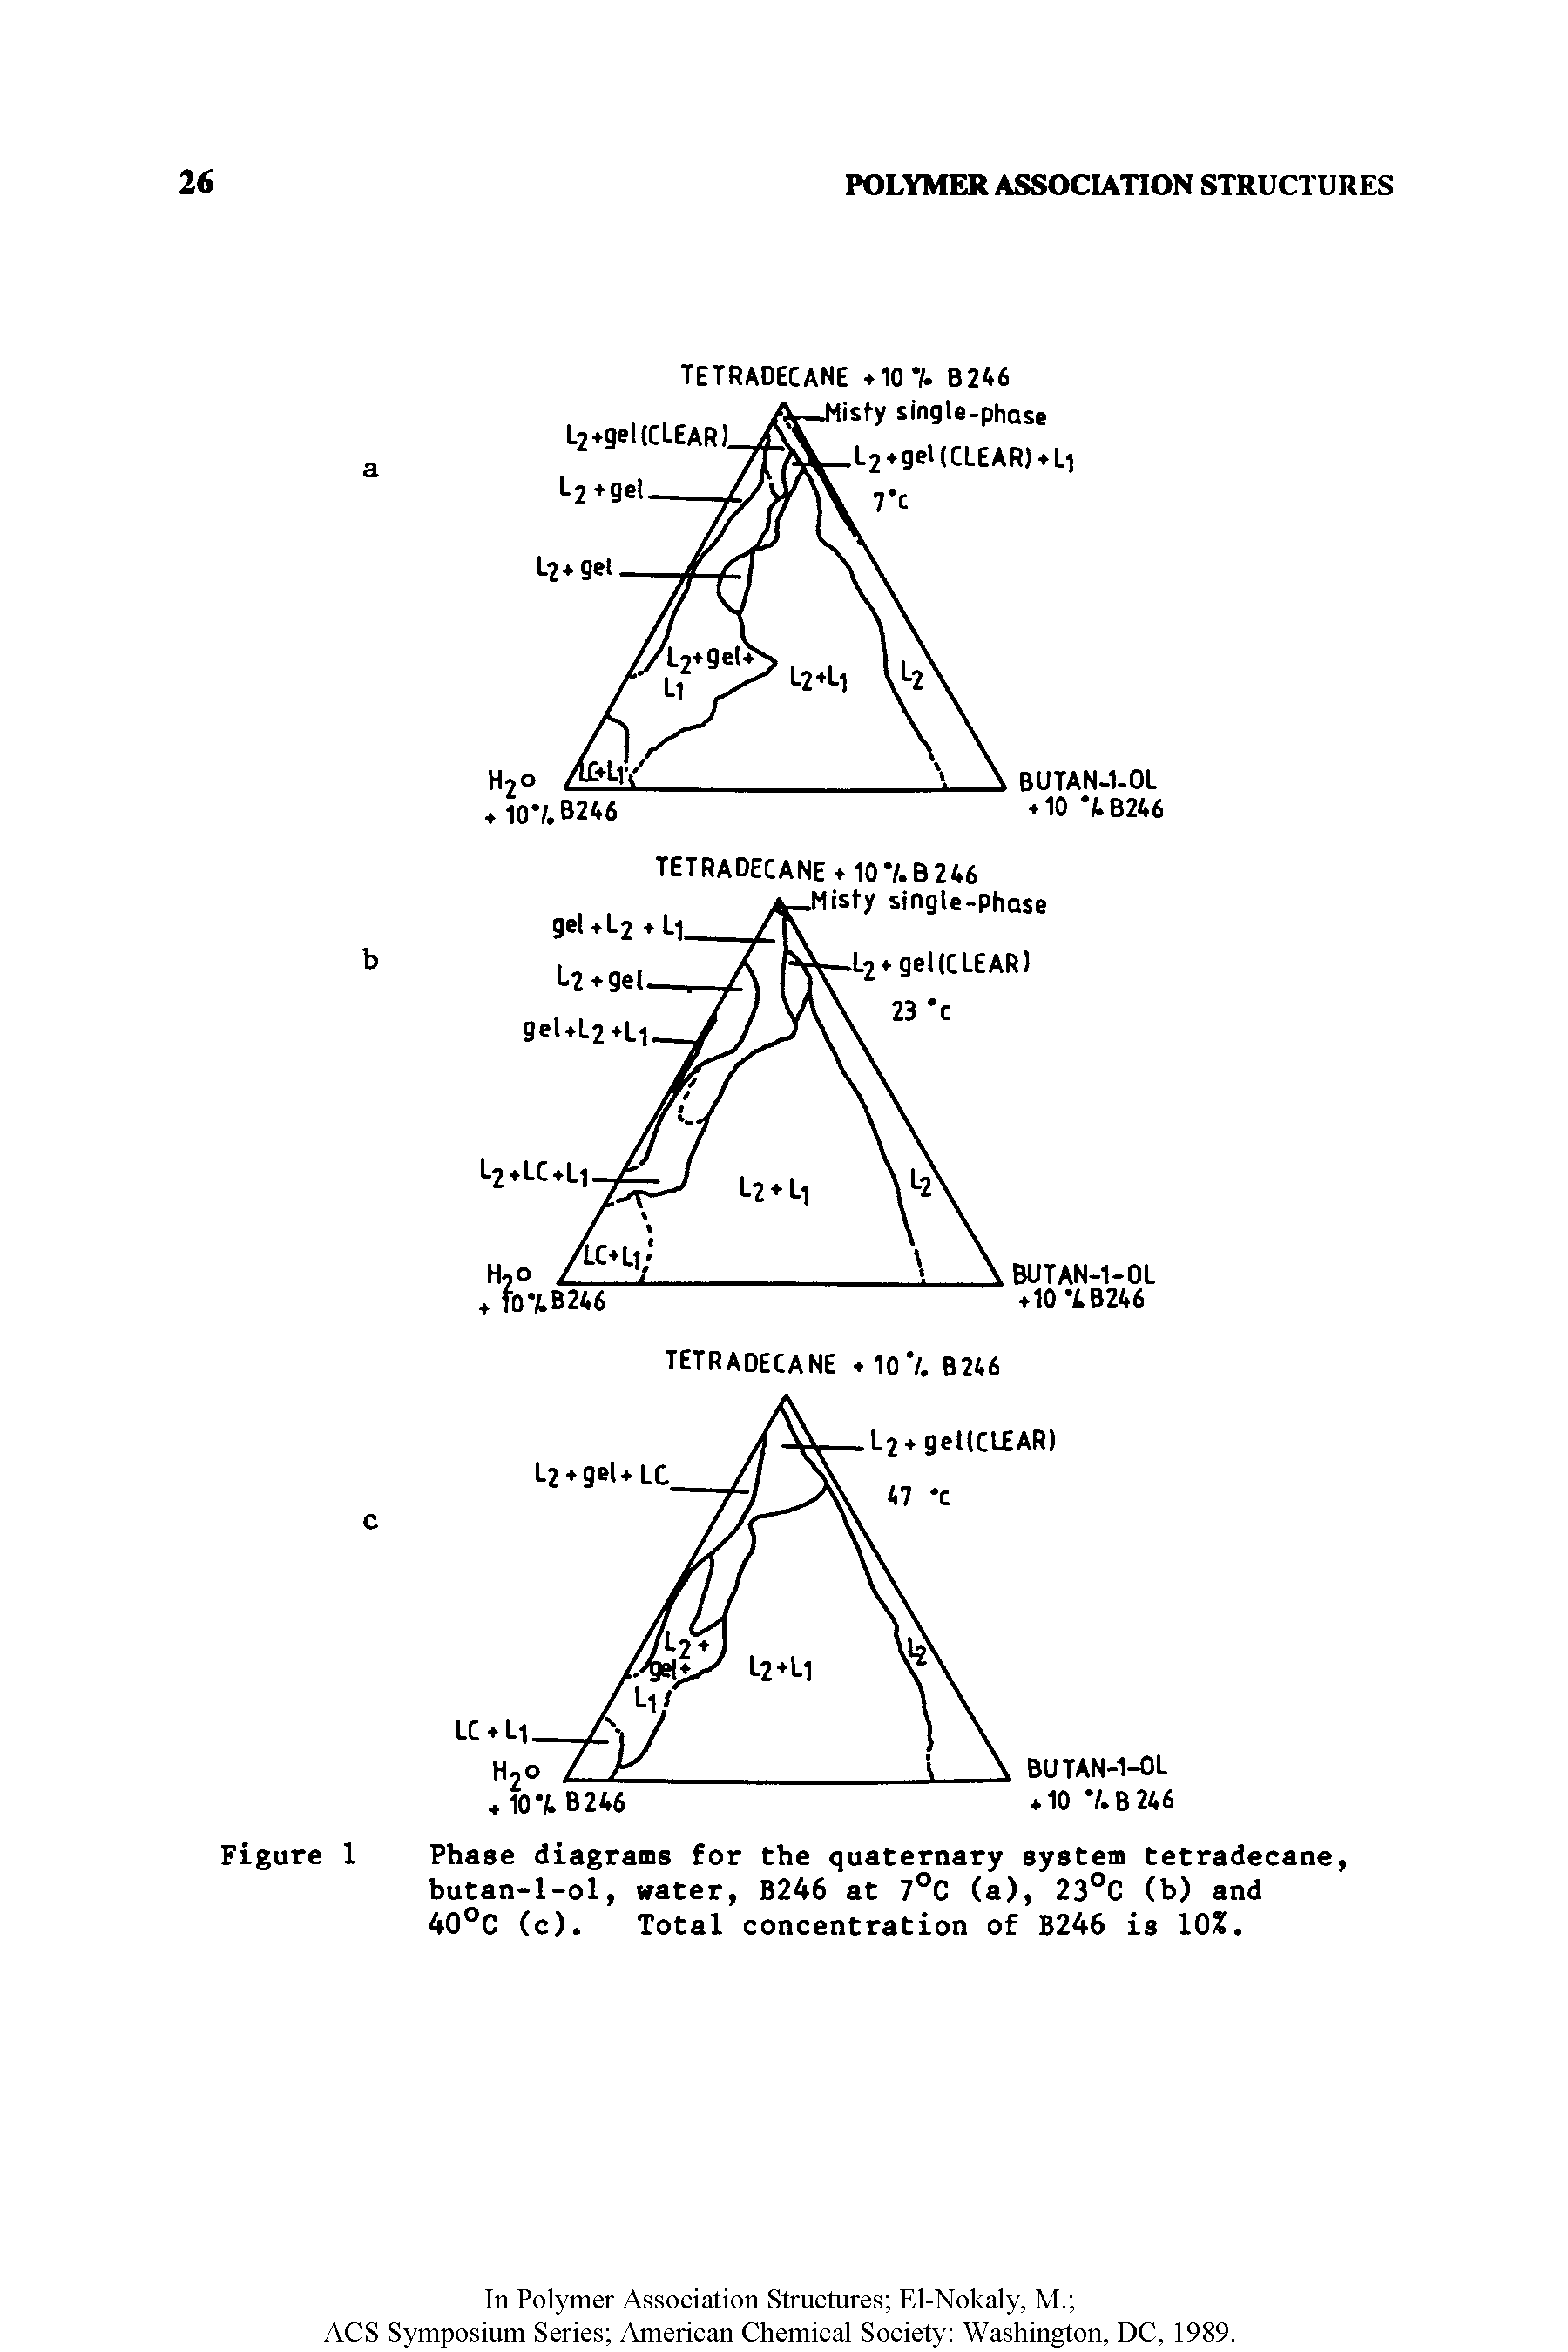 Figure 1 Phase diagrams for the quaternary system tetradecane, butan-l-ol, water, B246 at 7°C (a), 23°C (b) and 40°C (c). Total concentration of B246 is 10%.